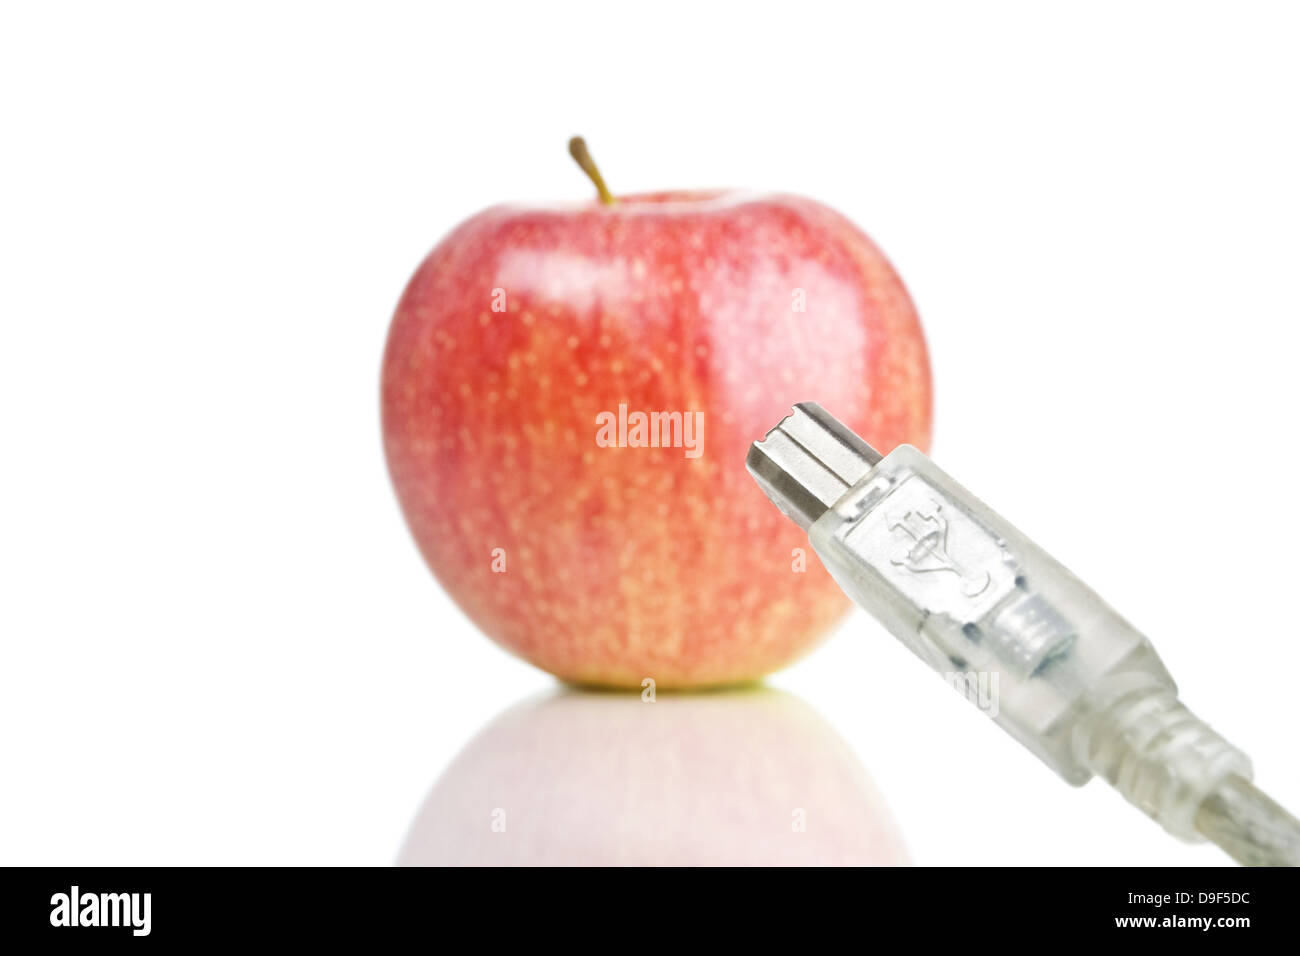 Apple with Firewirekabel Apple firewire cable Stock Photo